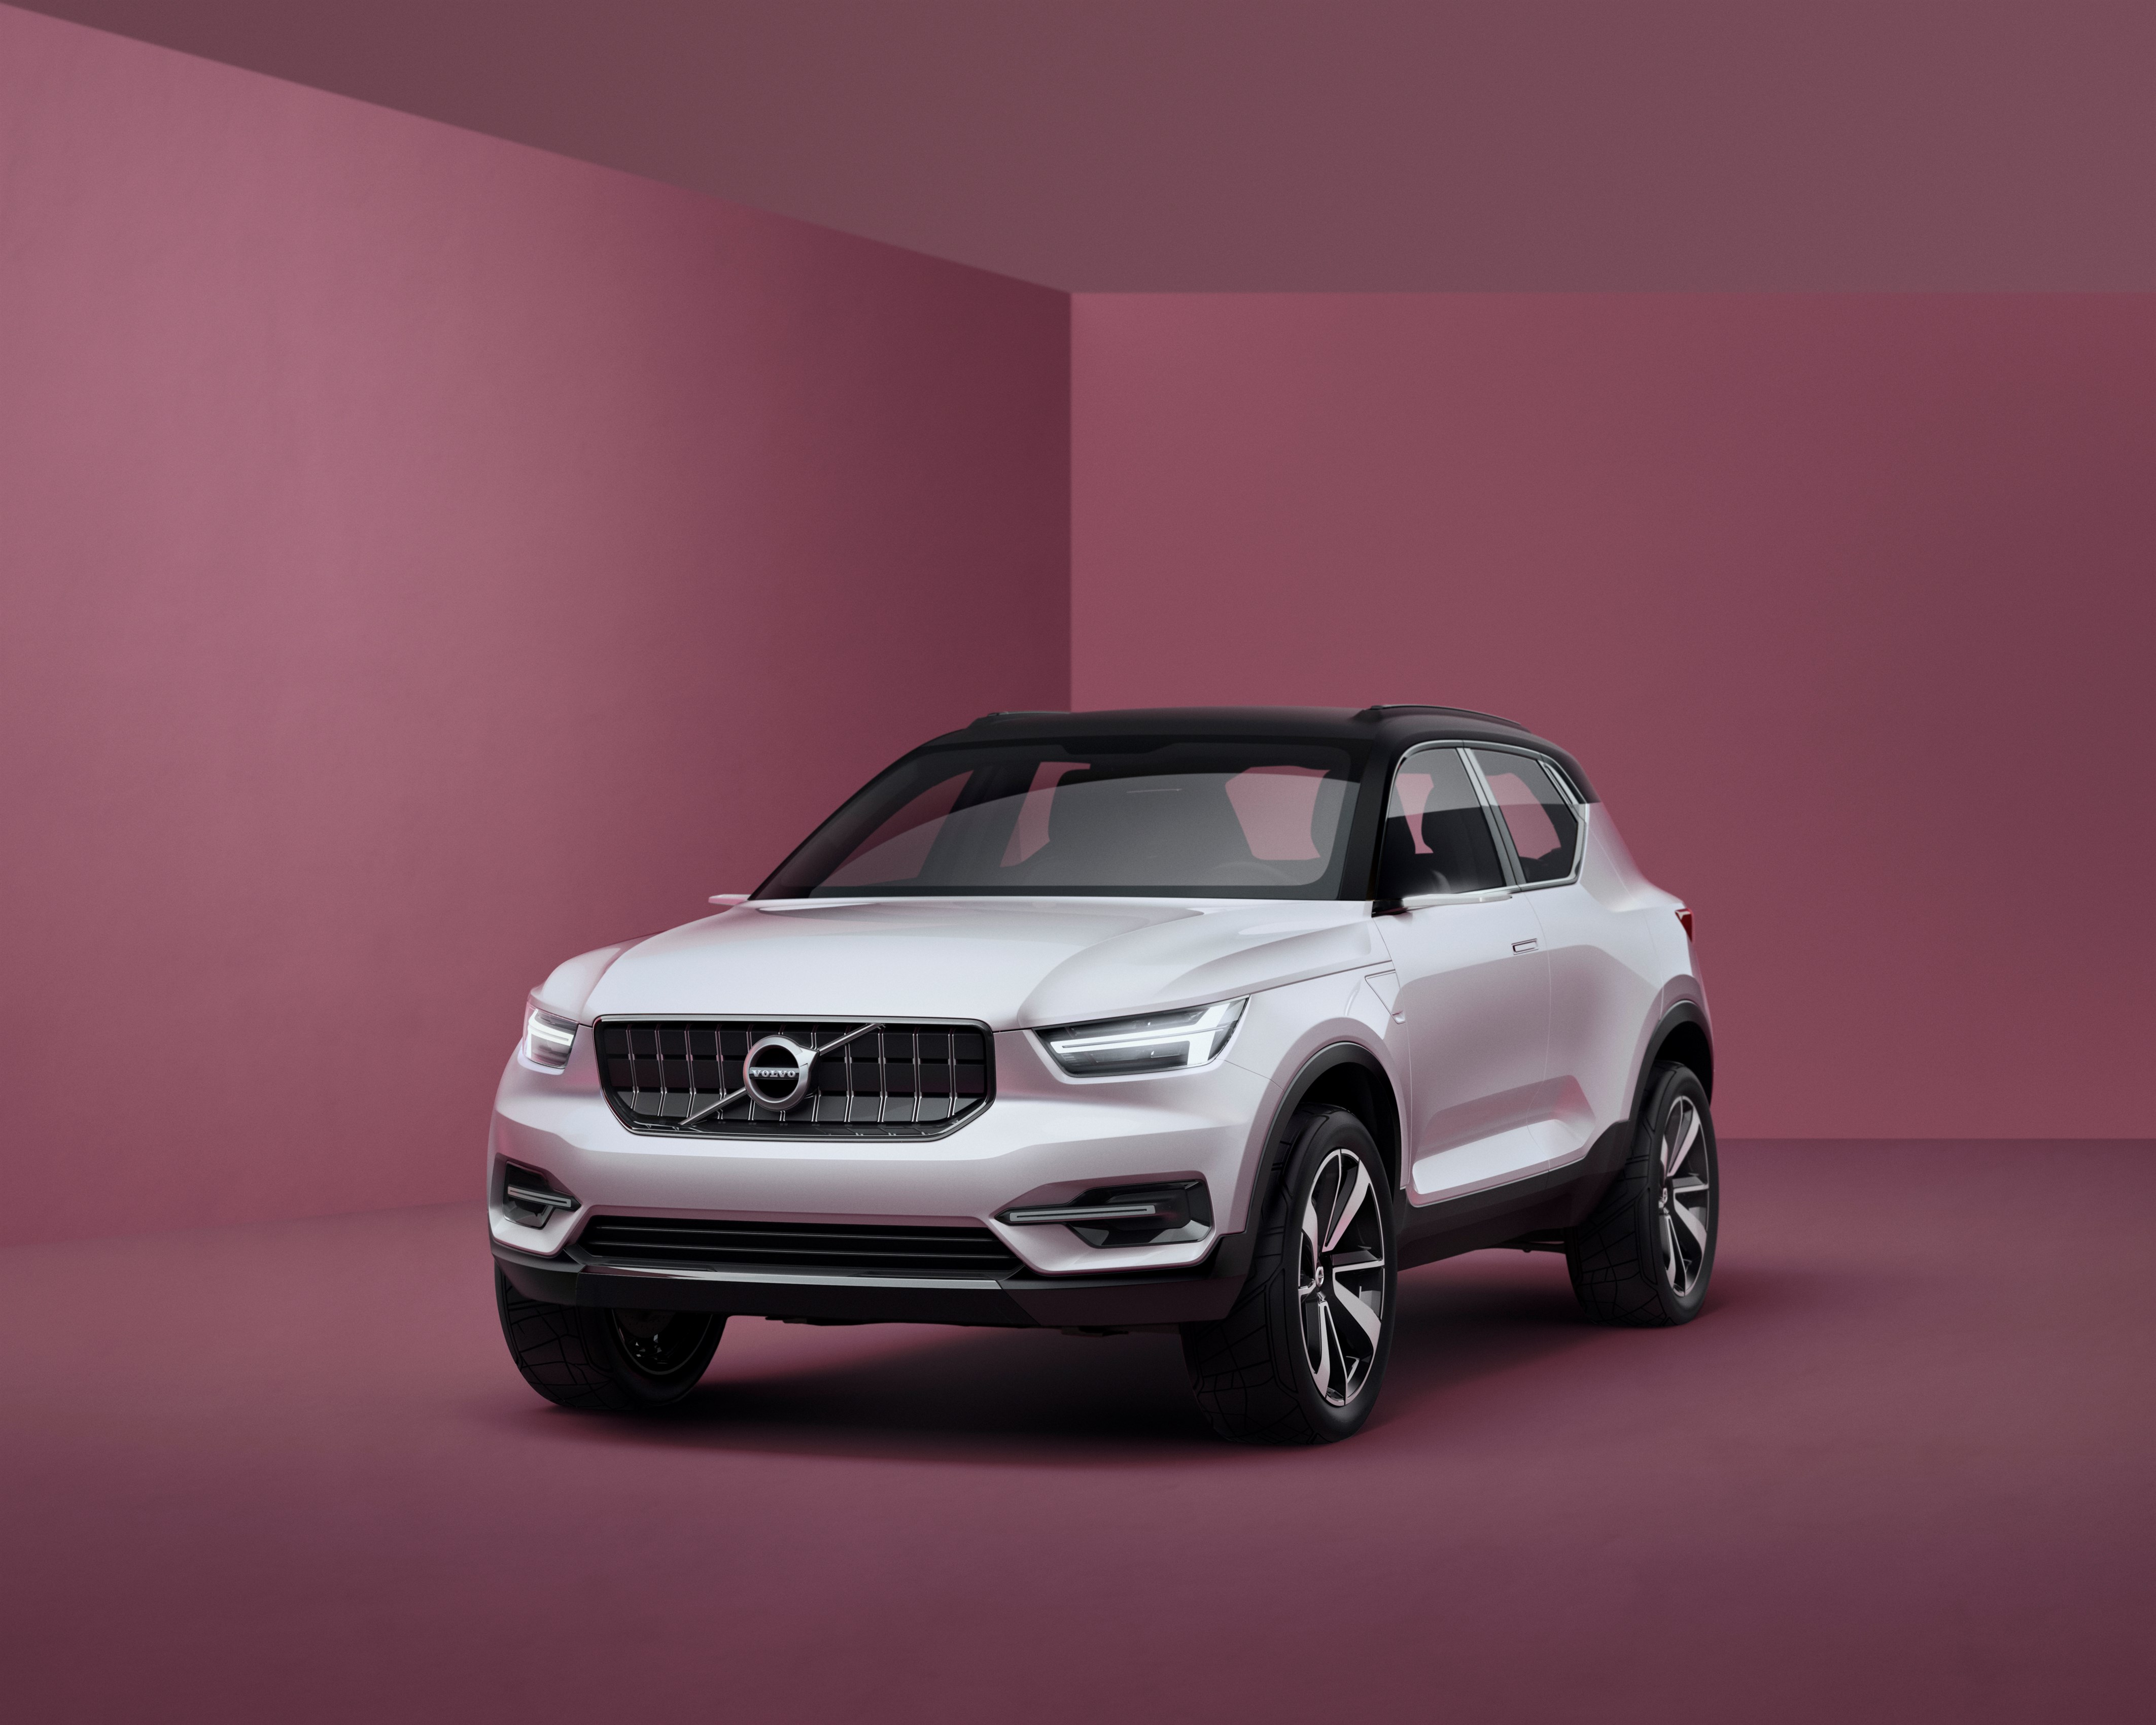 Volvo Announces Two Concept Vehicles and a Move Toward Small Cars